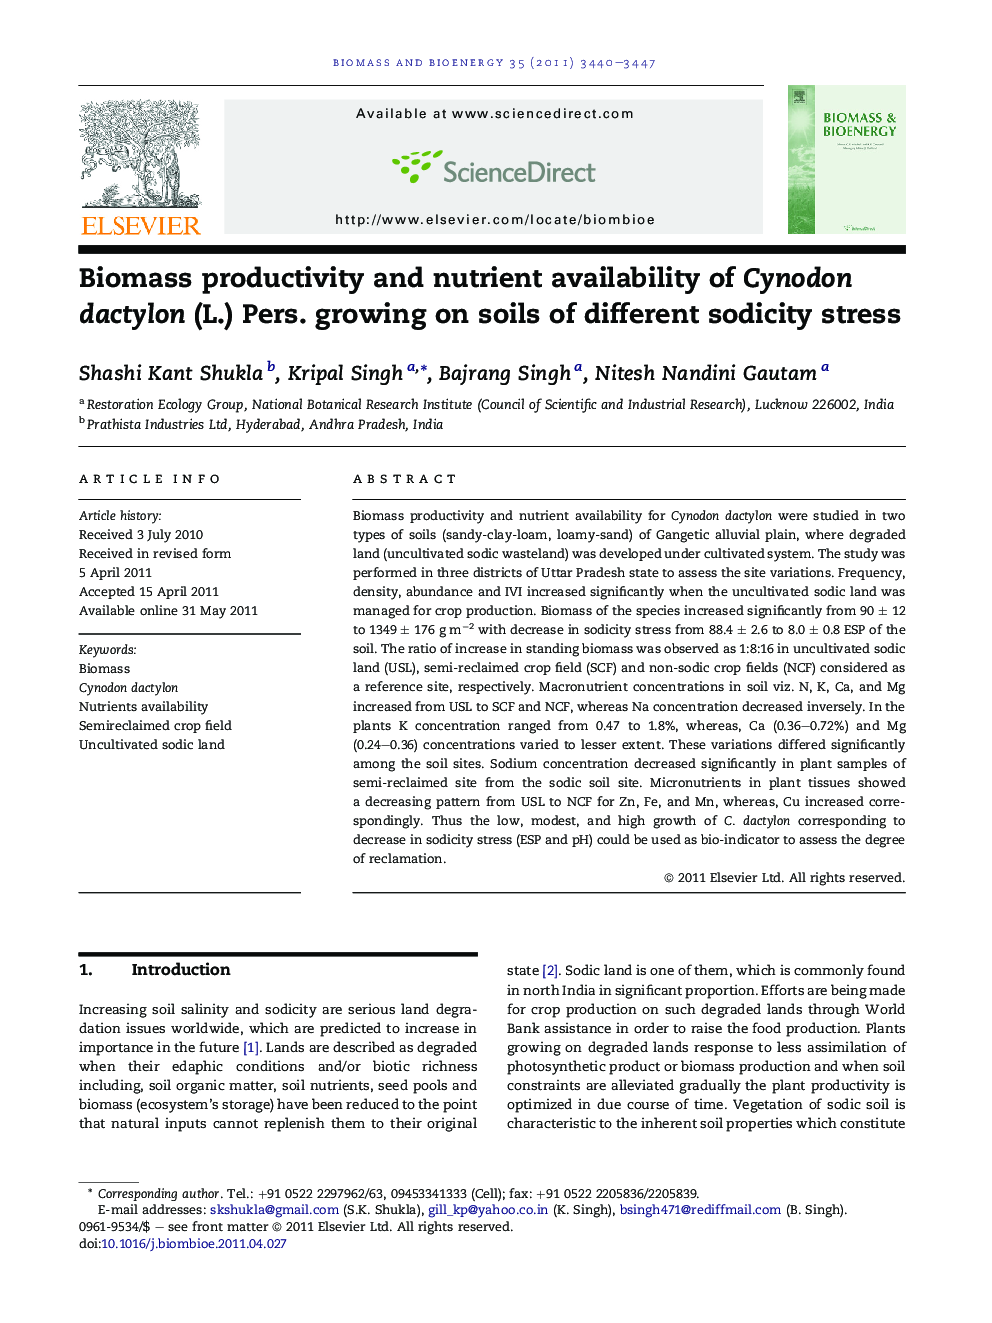 Biomass productivity and nutrient availability of Cynodon dactylon (L.) Pers. growing on soils of different sodicity stress